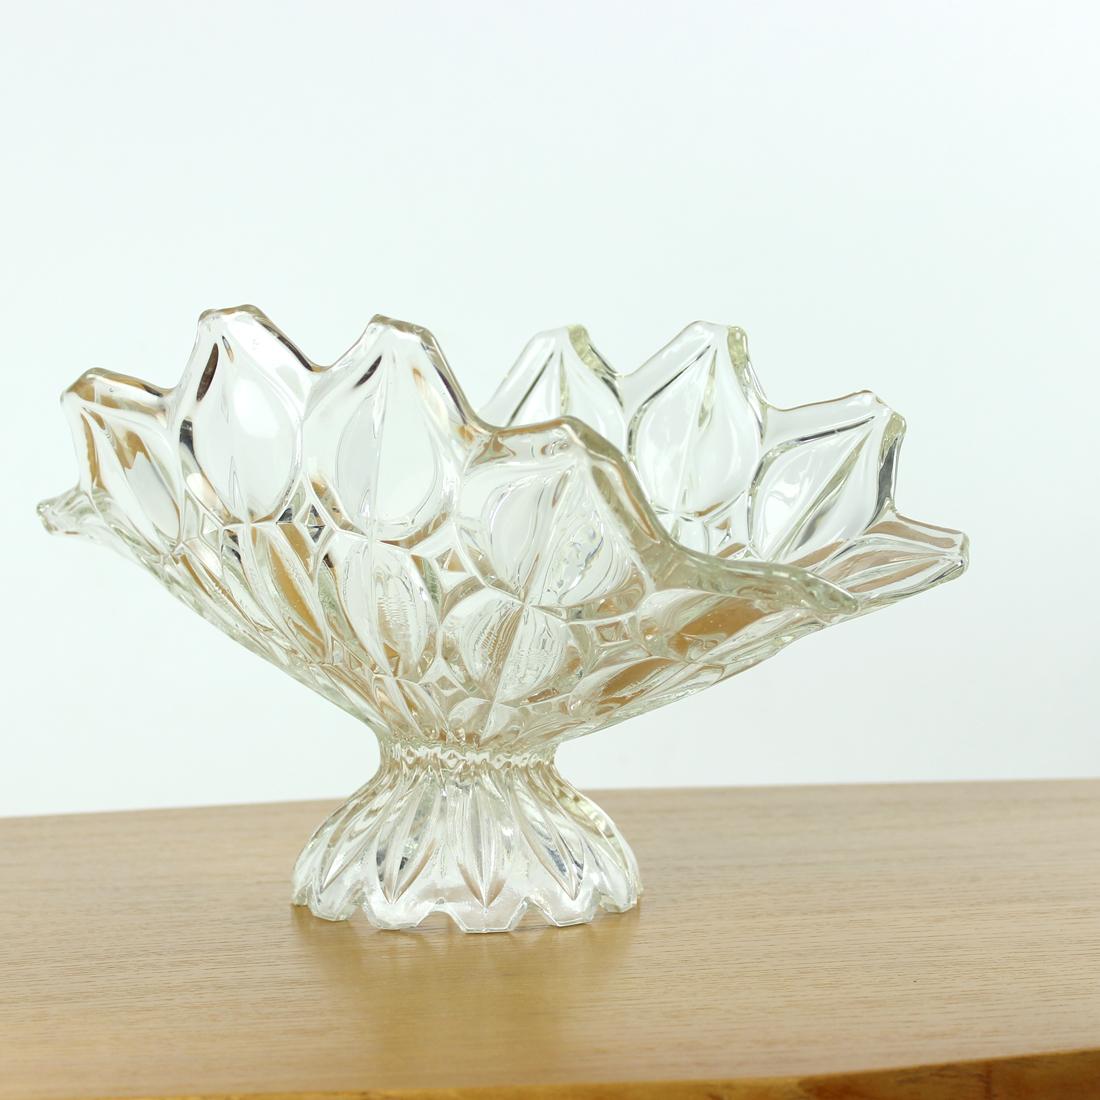 Large Pressed Glass Bowl, Tulip Collection Hermanowa Hut, 1957 For Sale 8